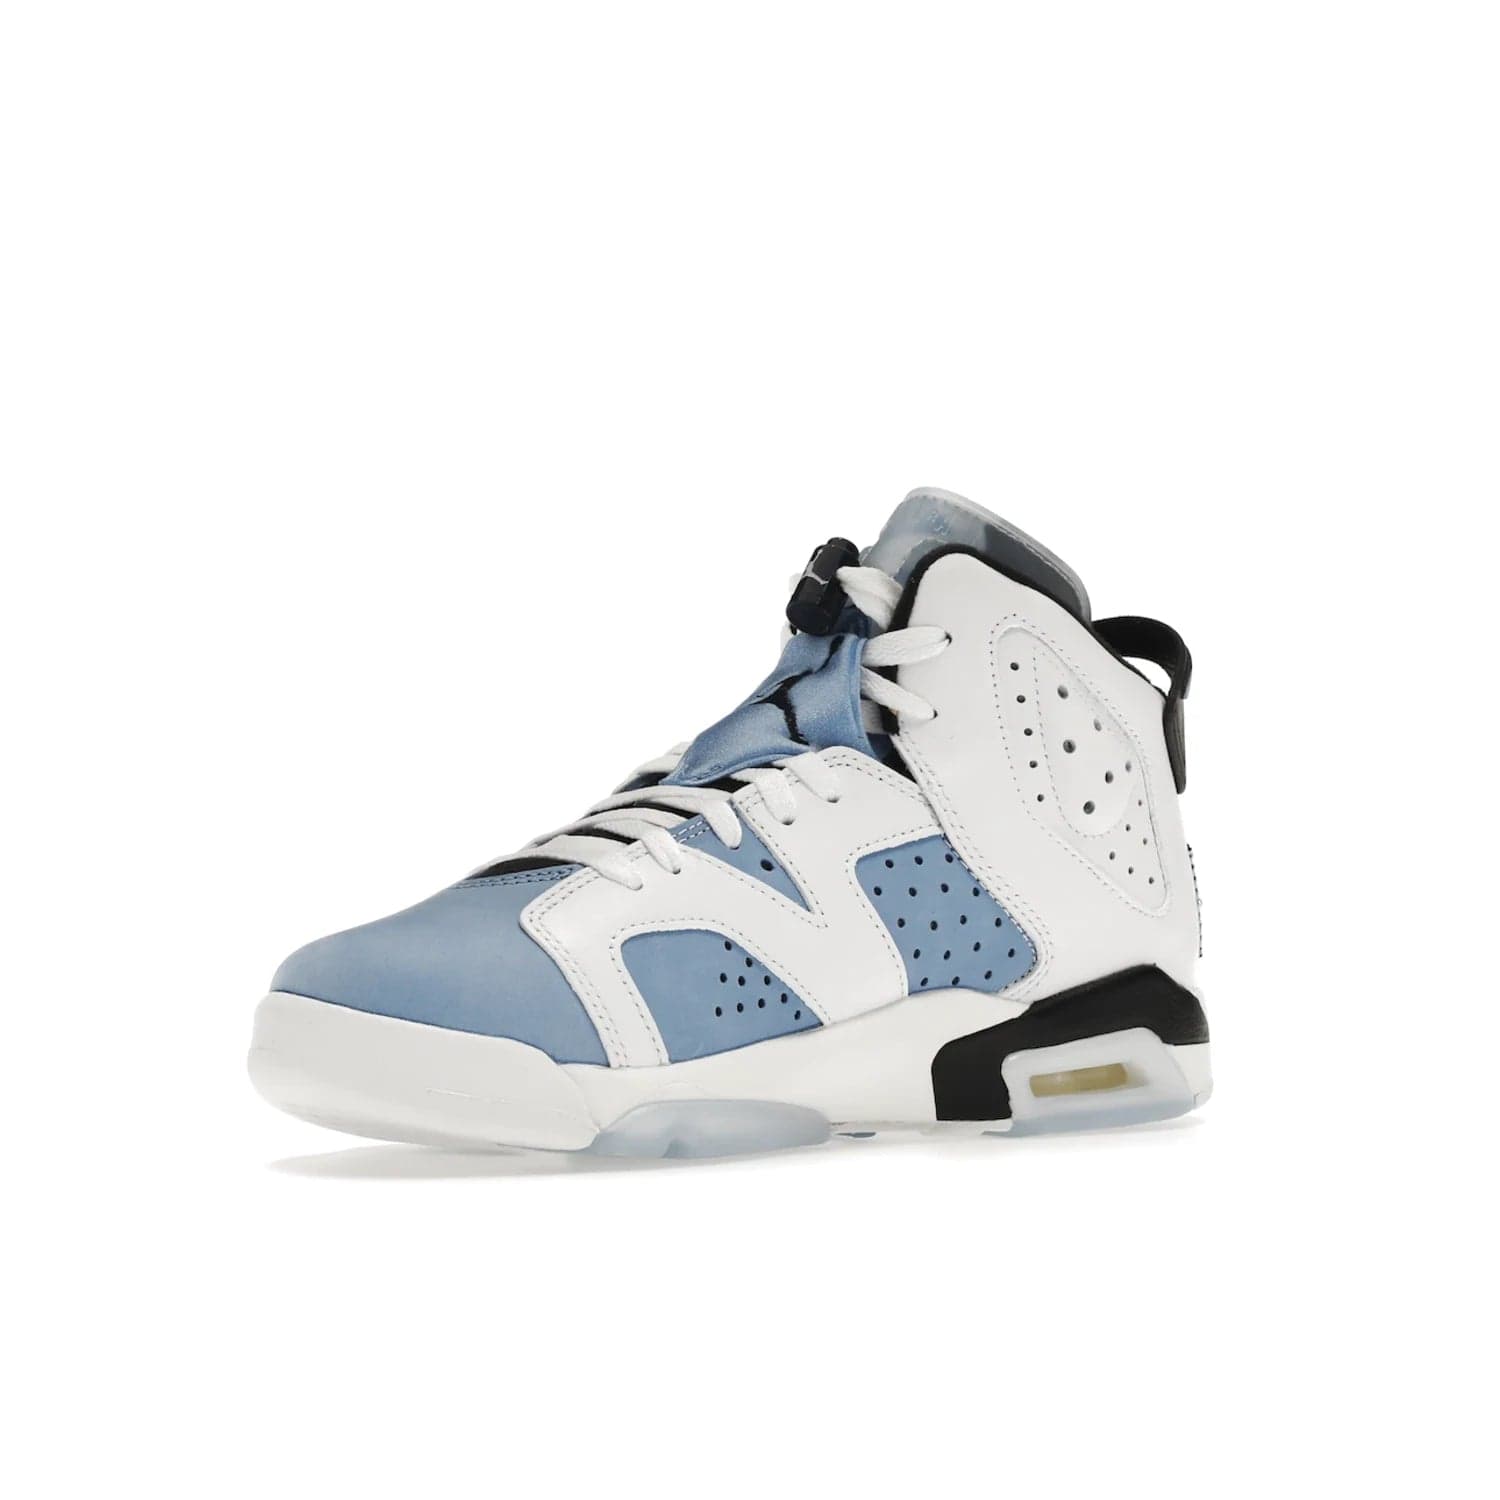 Jordan 6 Retro UNC White (GS) - Image 15 - Only at www.BallersClubKickz.com - Air Jordan 6 Retro UNC White GS: Michael Jordan alma mater, UNC Tar Heels, featuring colorway, nubuck, leather, Jumpman branding and a visible Air unit. Translucent blue/white outsole, perfect for completing sneaker rotation.